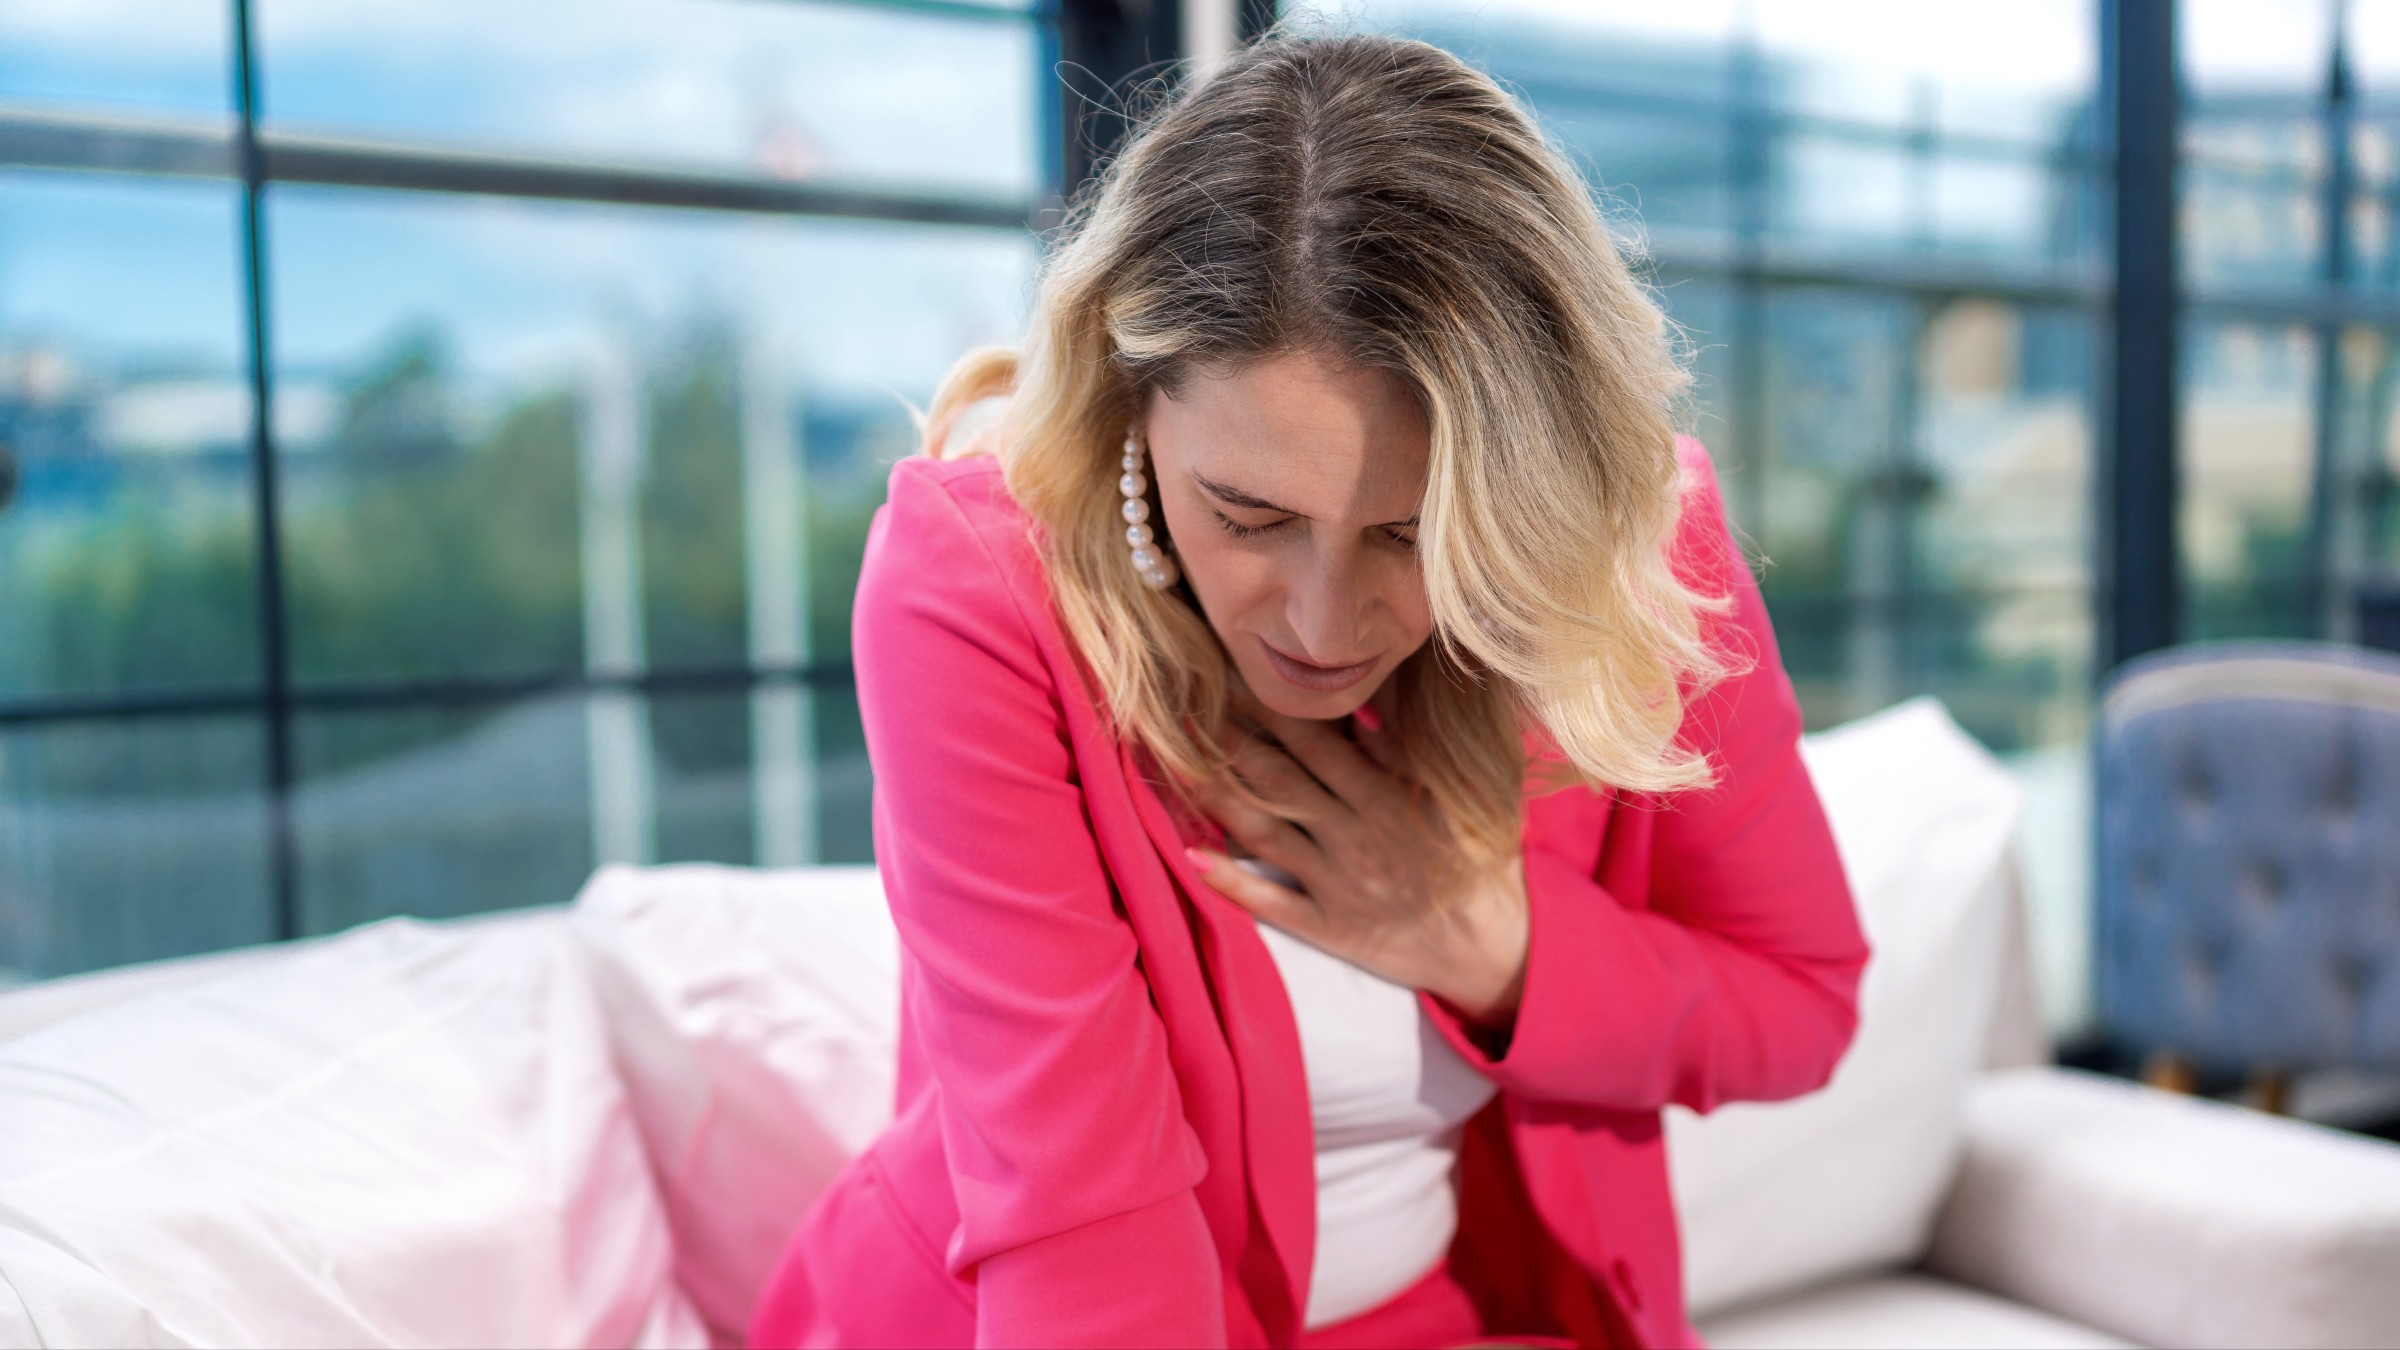 Is Stress Causing My Chest Pain? - GoodRx